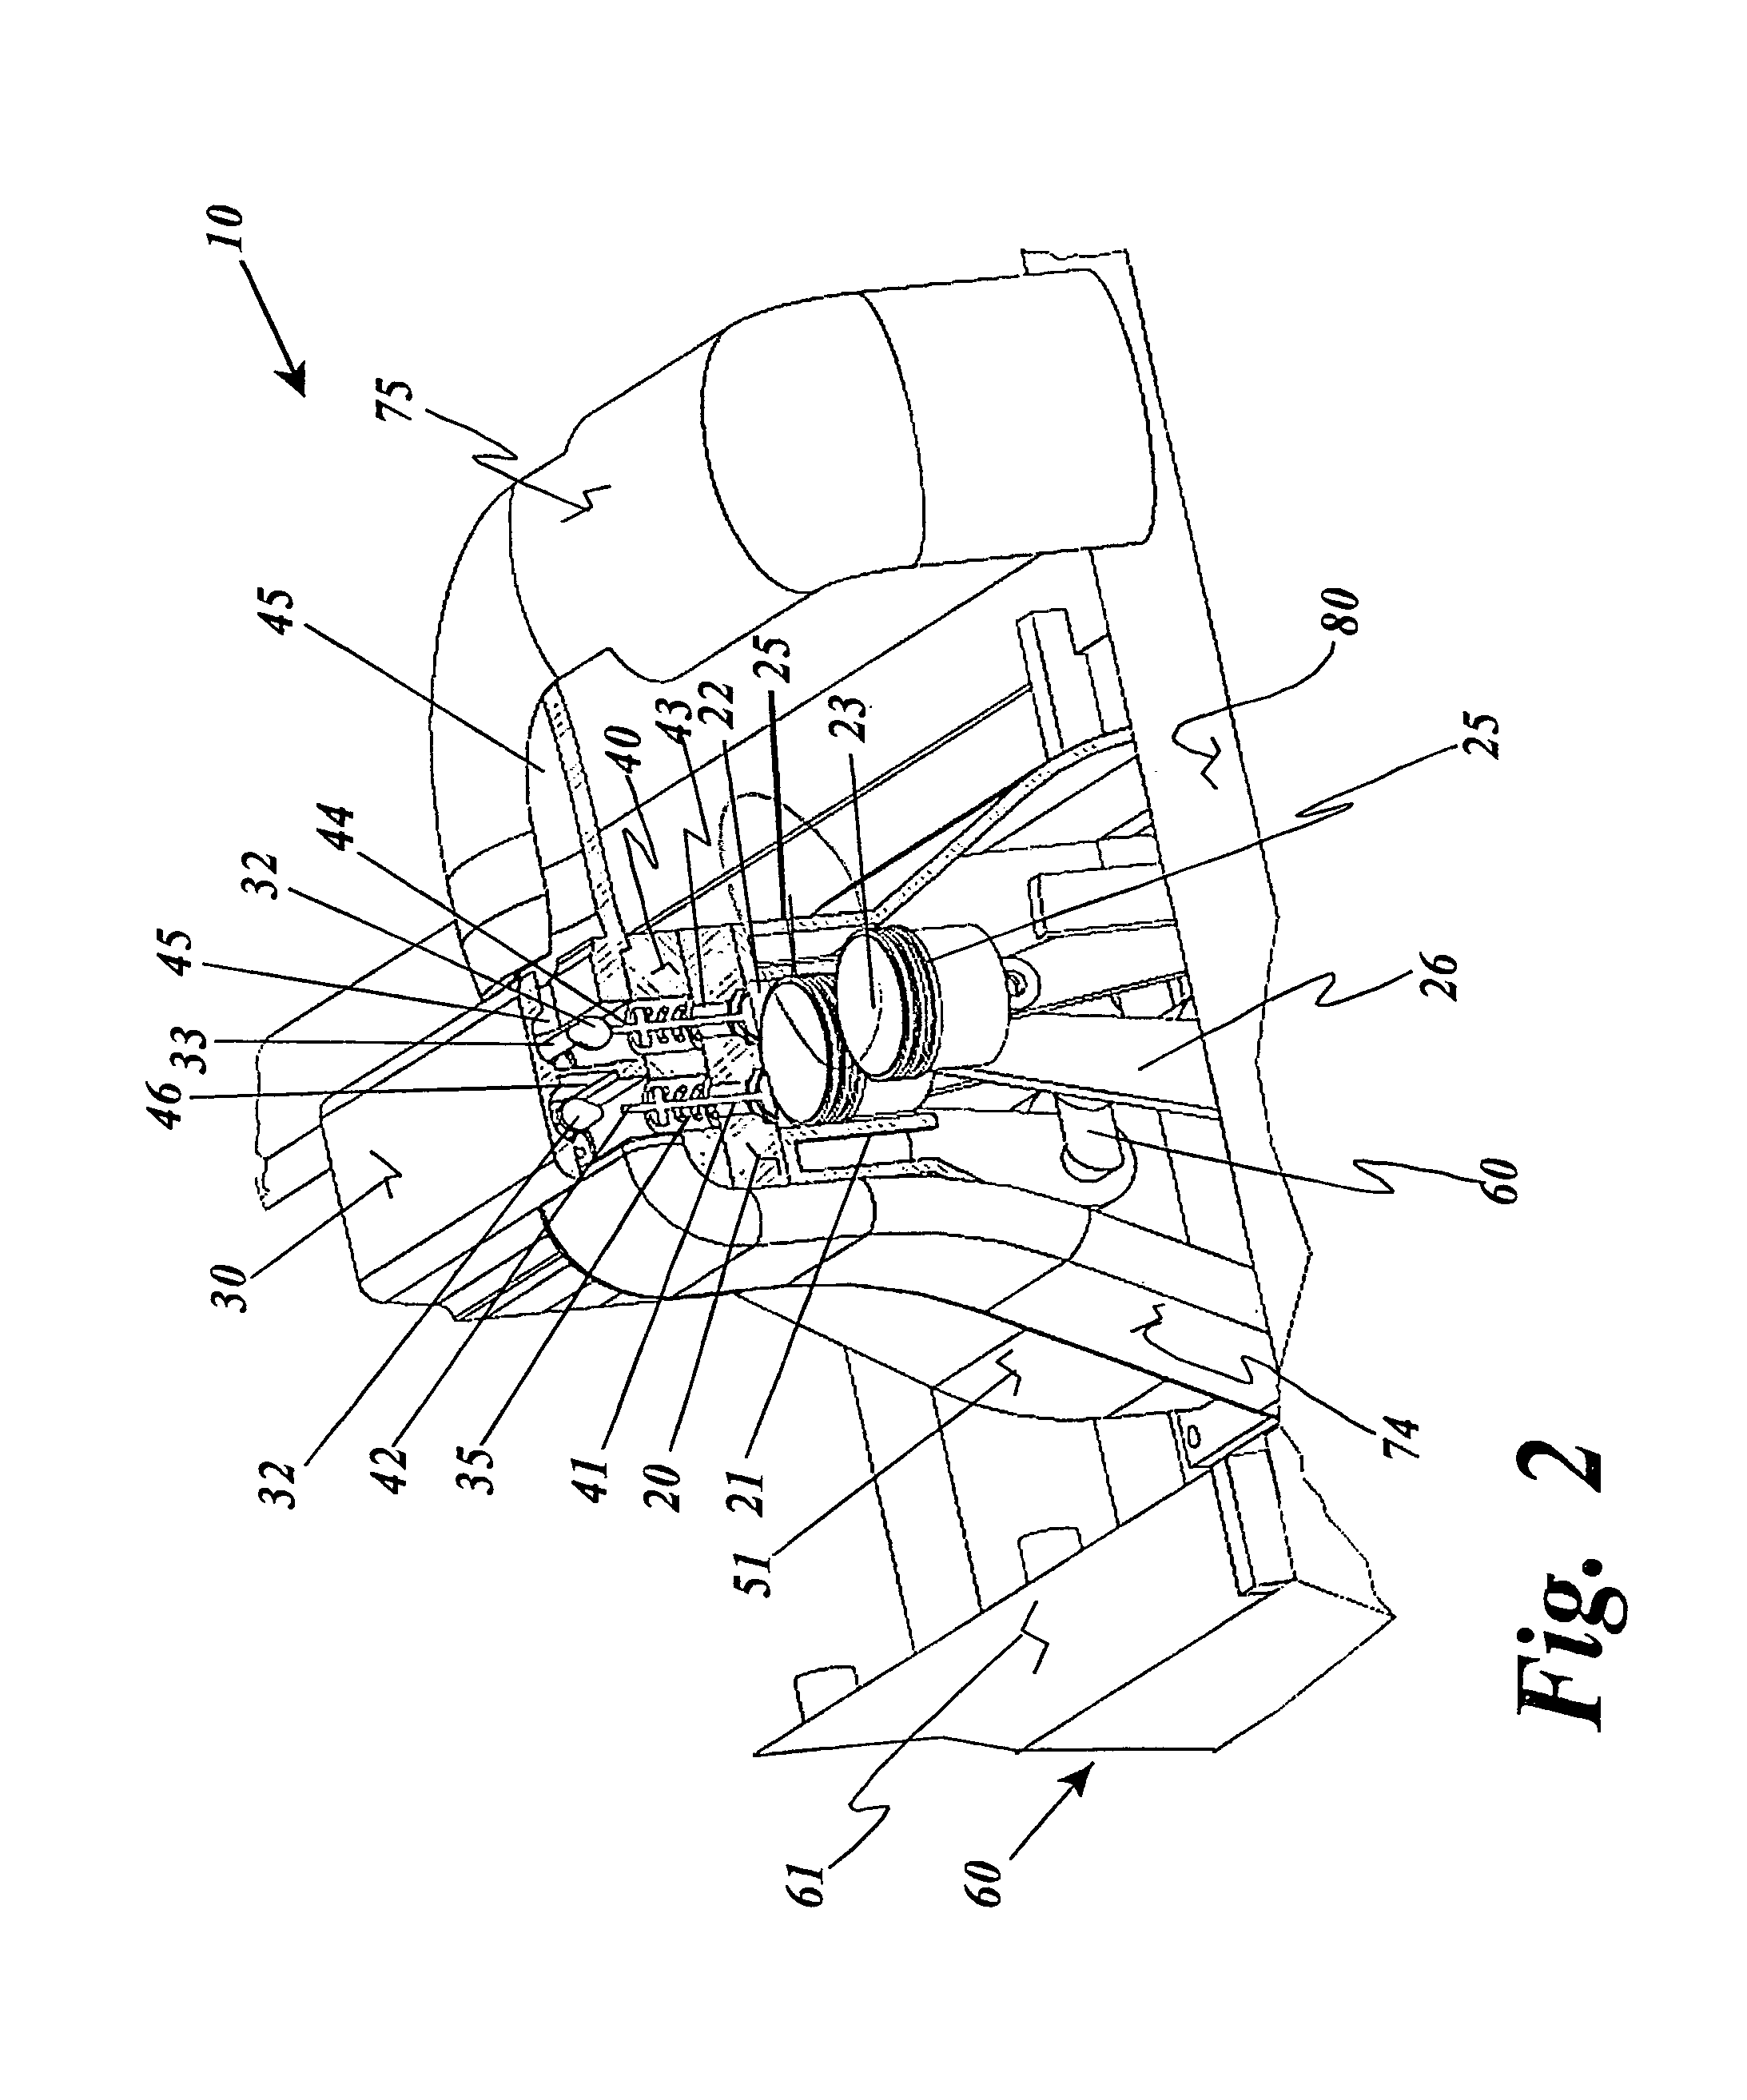 Thermal engine for operation with noncombustible fuels